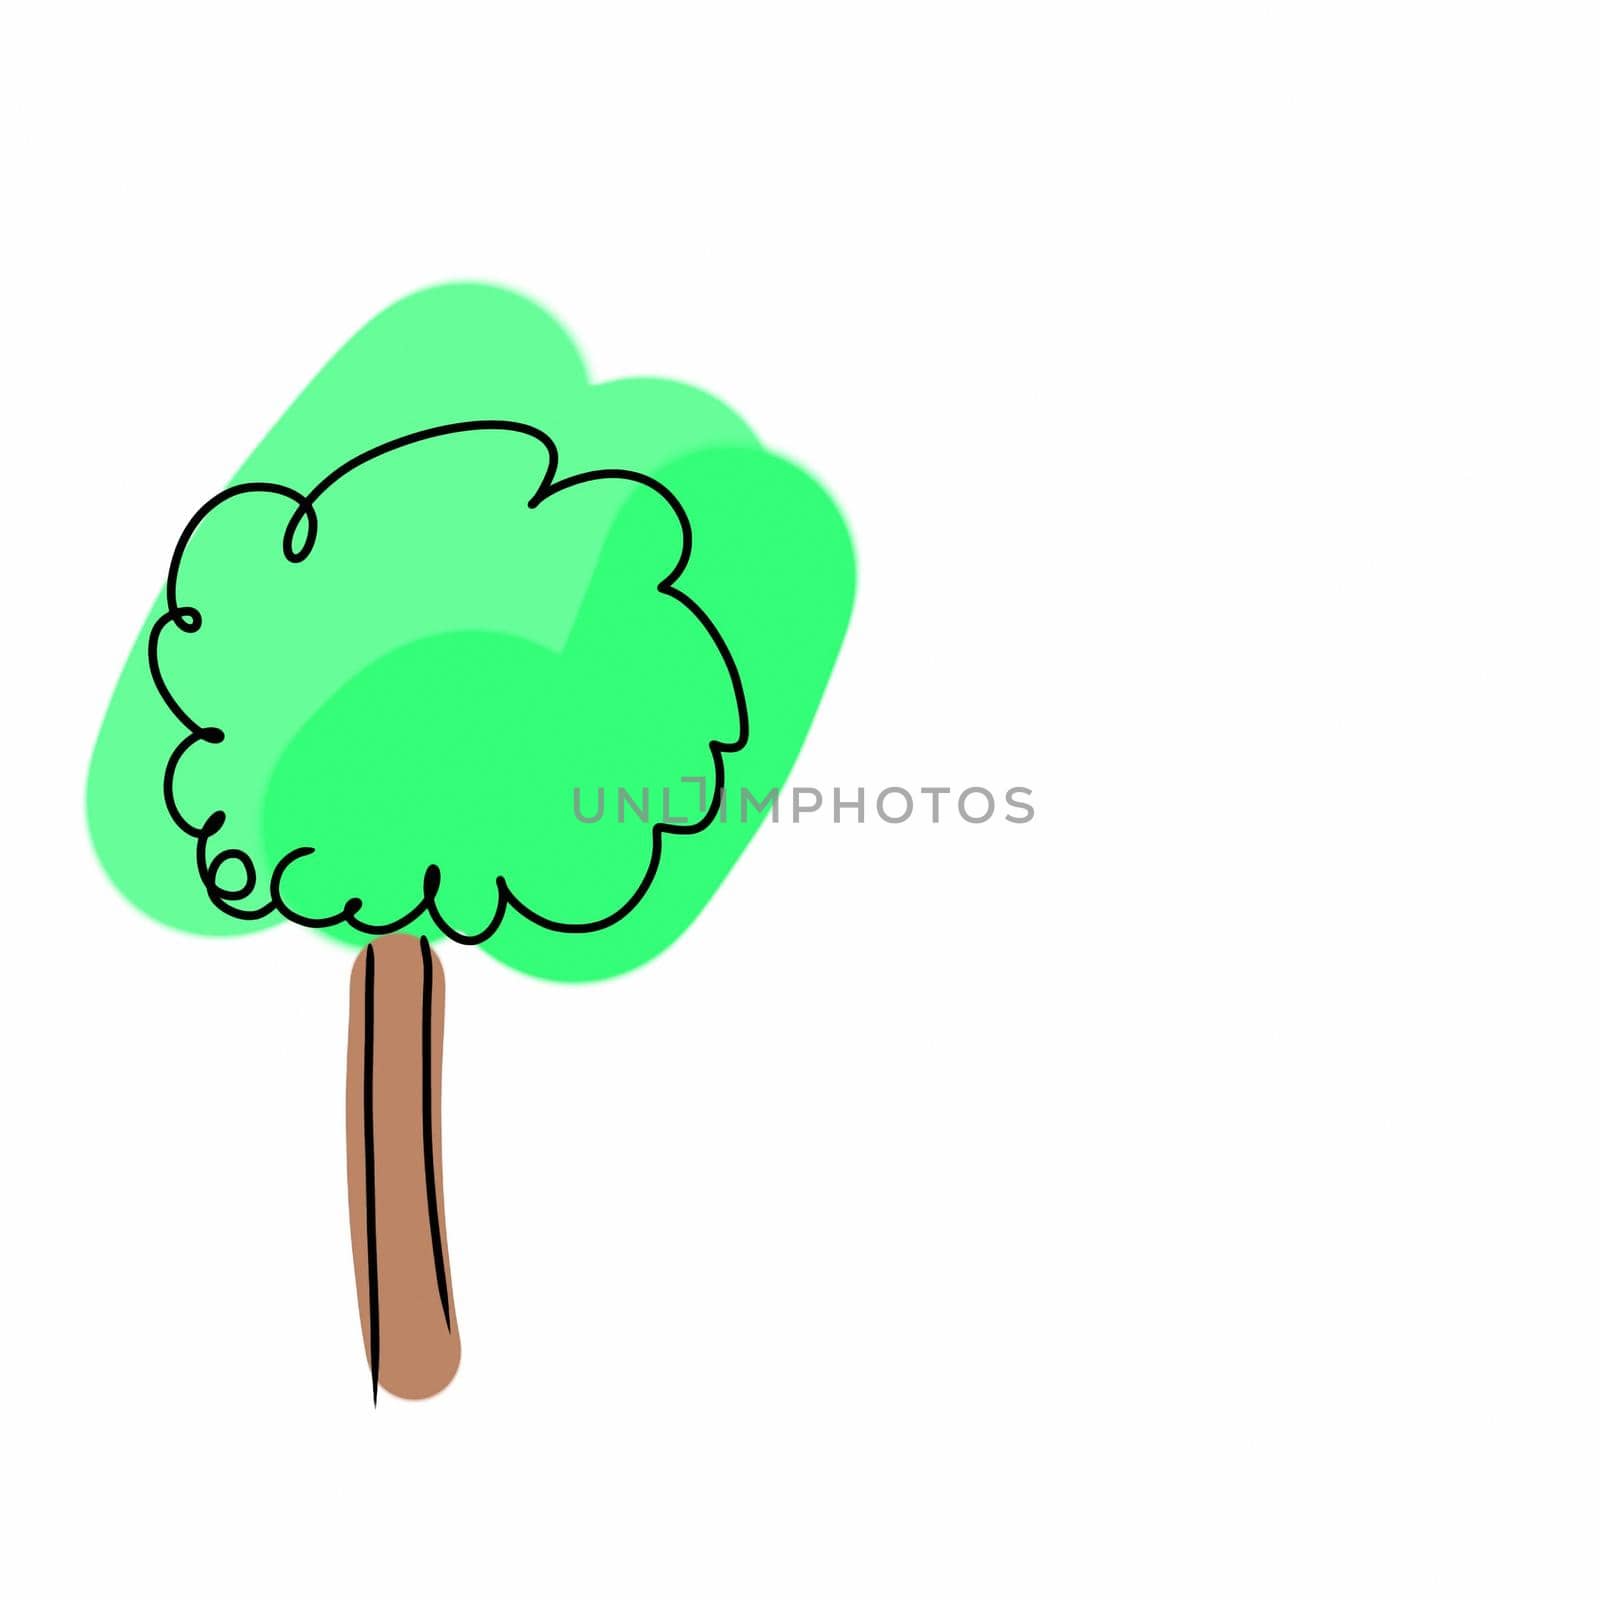 Isolated image of fir. Green tree in cartoon style on white background by profmon